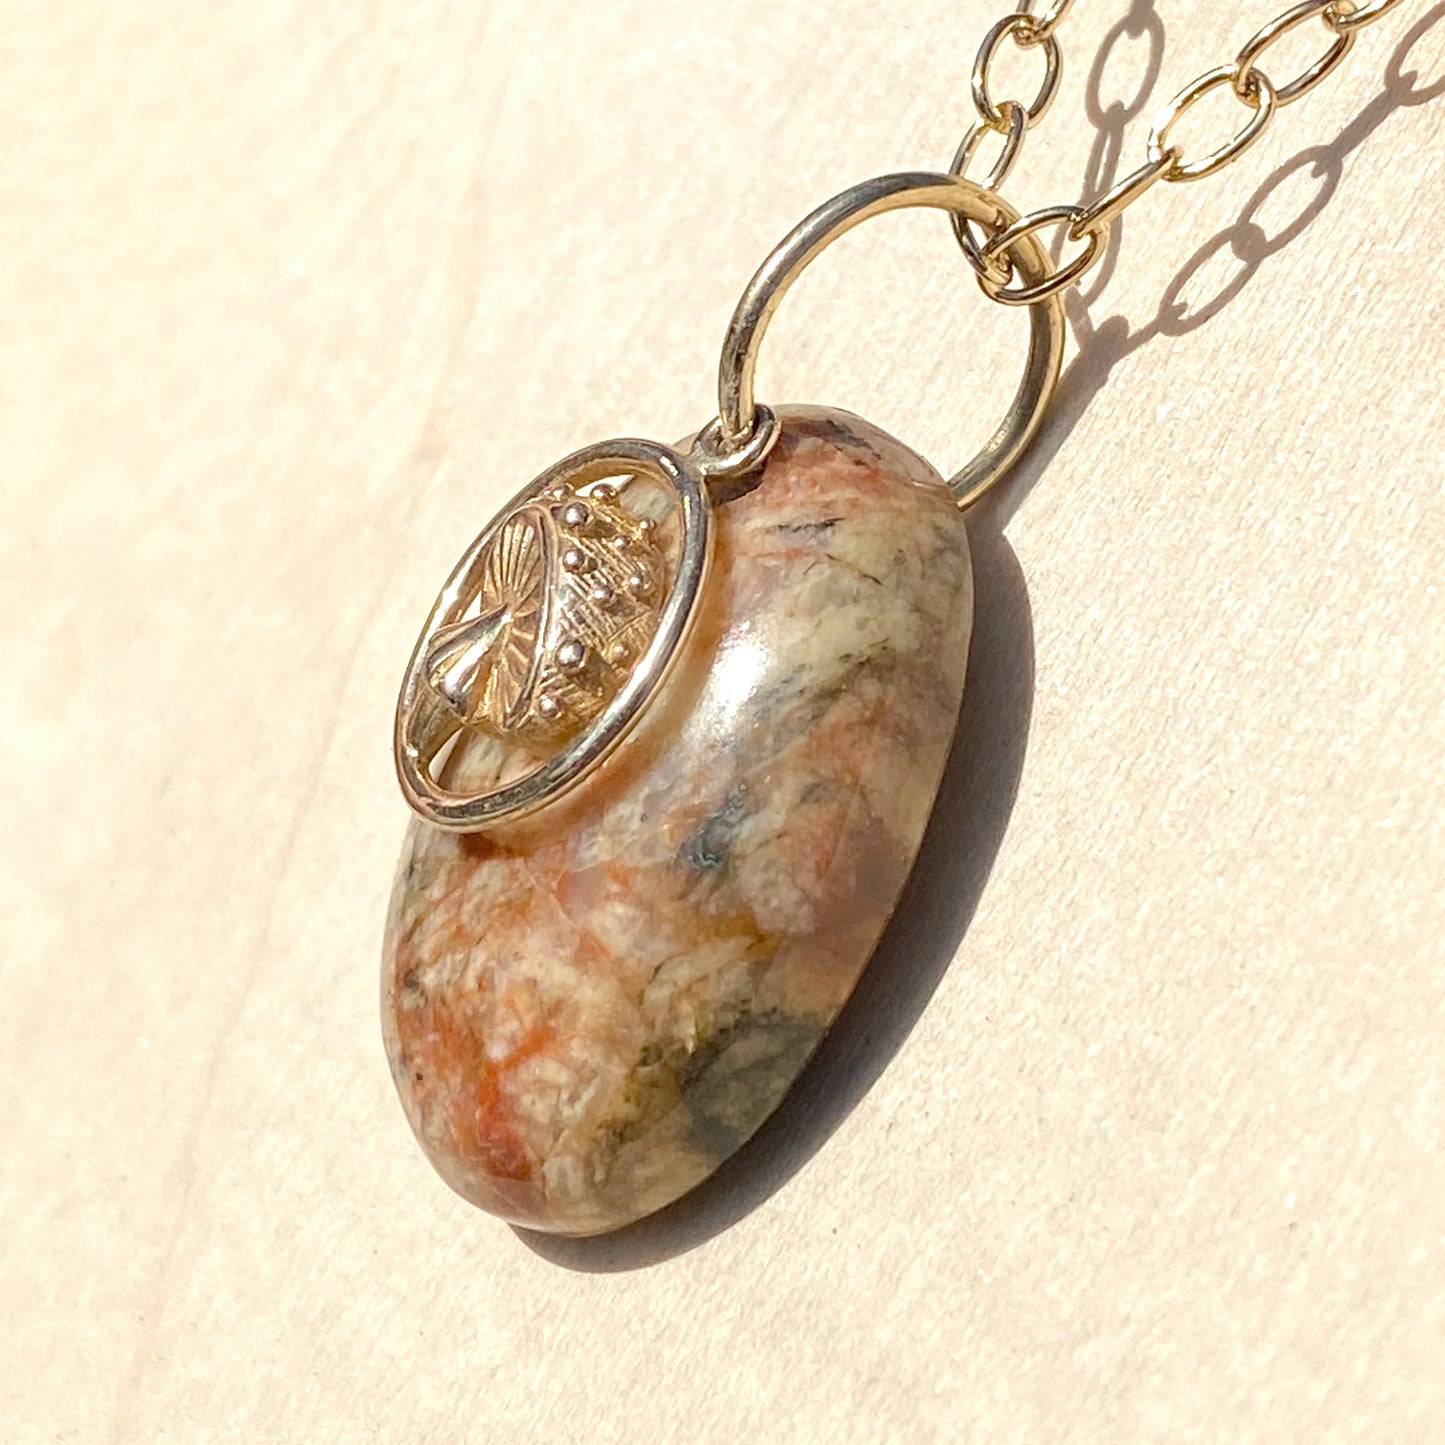 Granite with Mushroom  Charm Pendant Necklace - Stone Treasures by the Lake